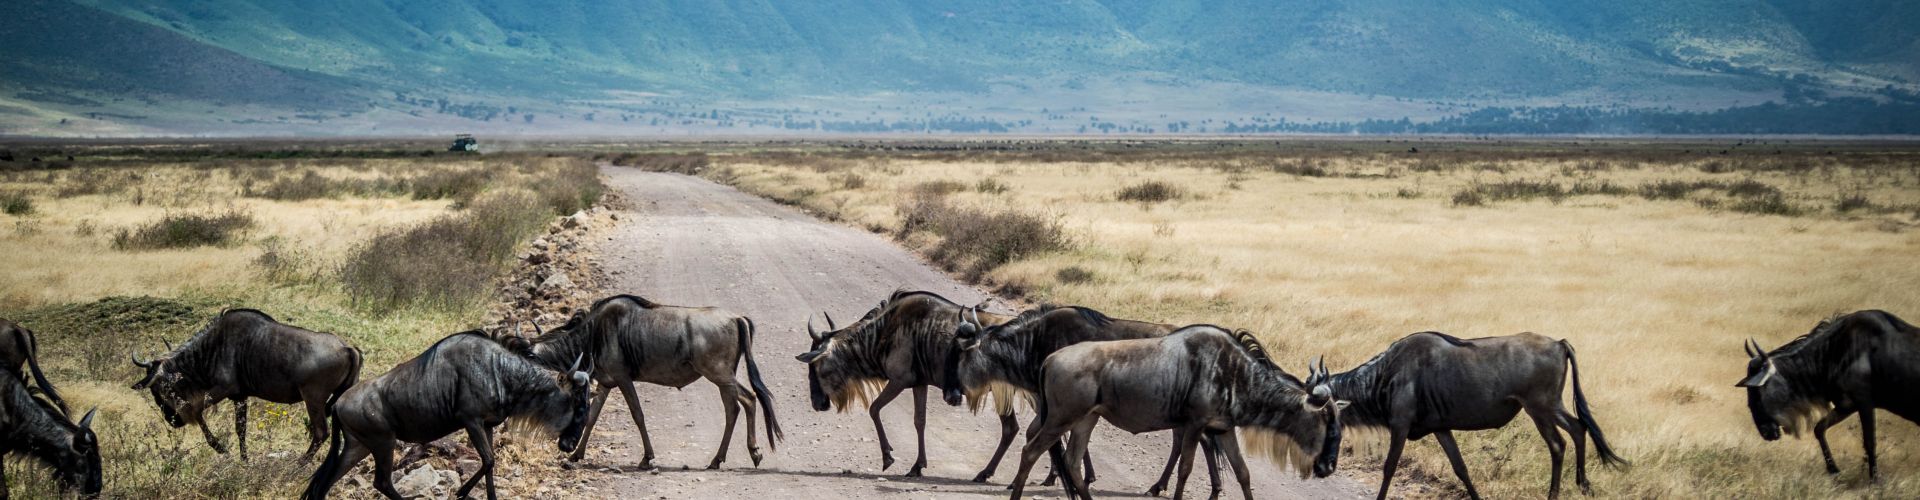 Gnus have right of way in the Ngorongoro Crater